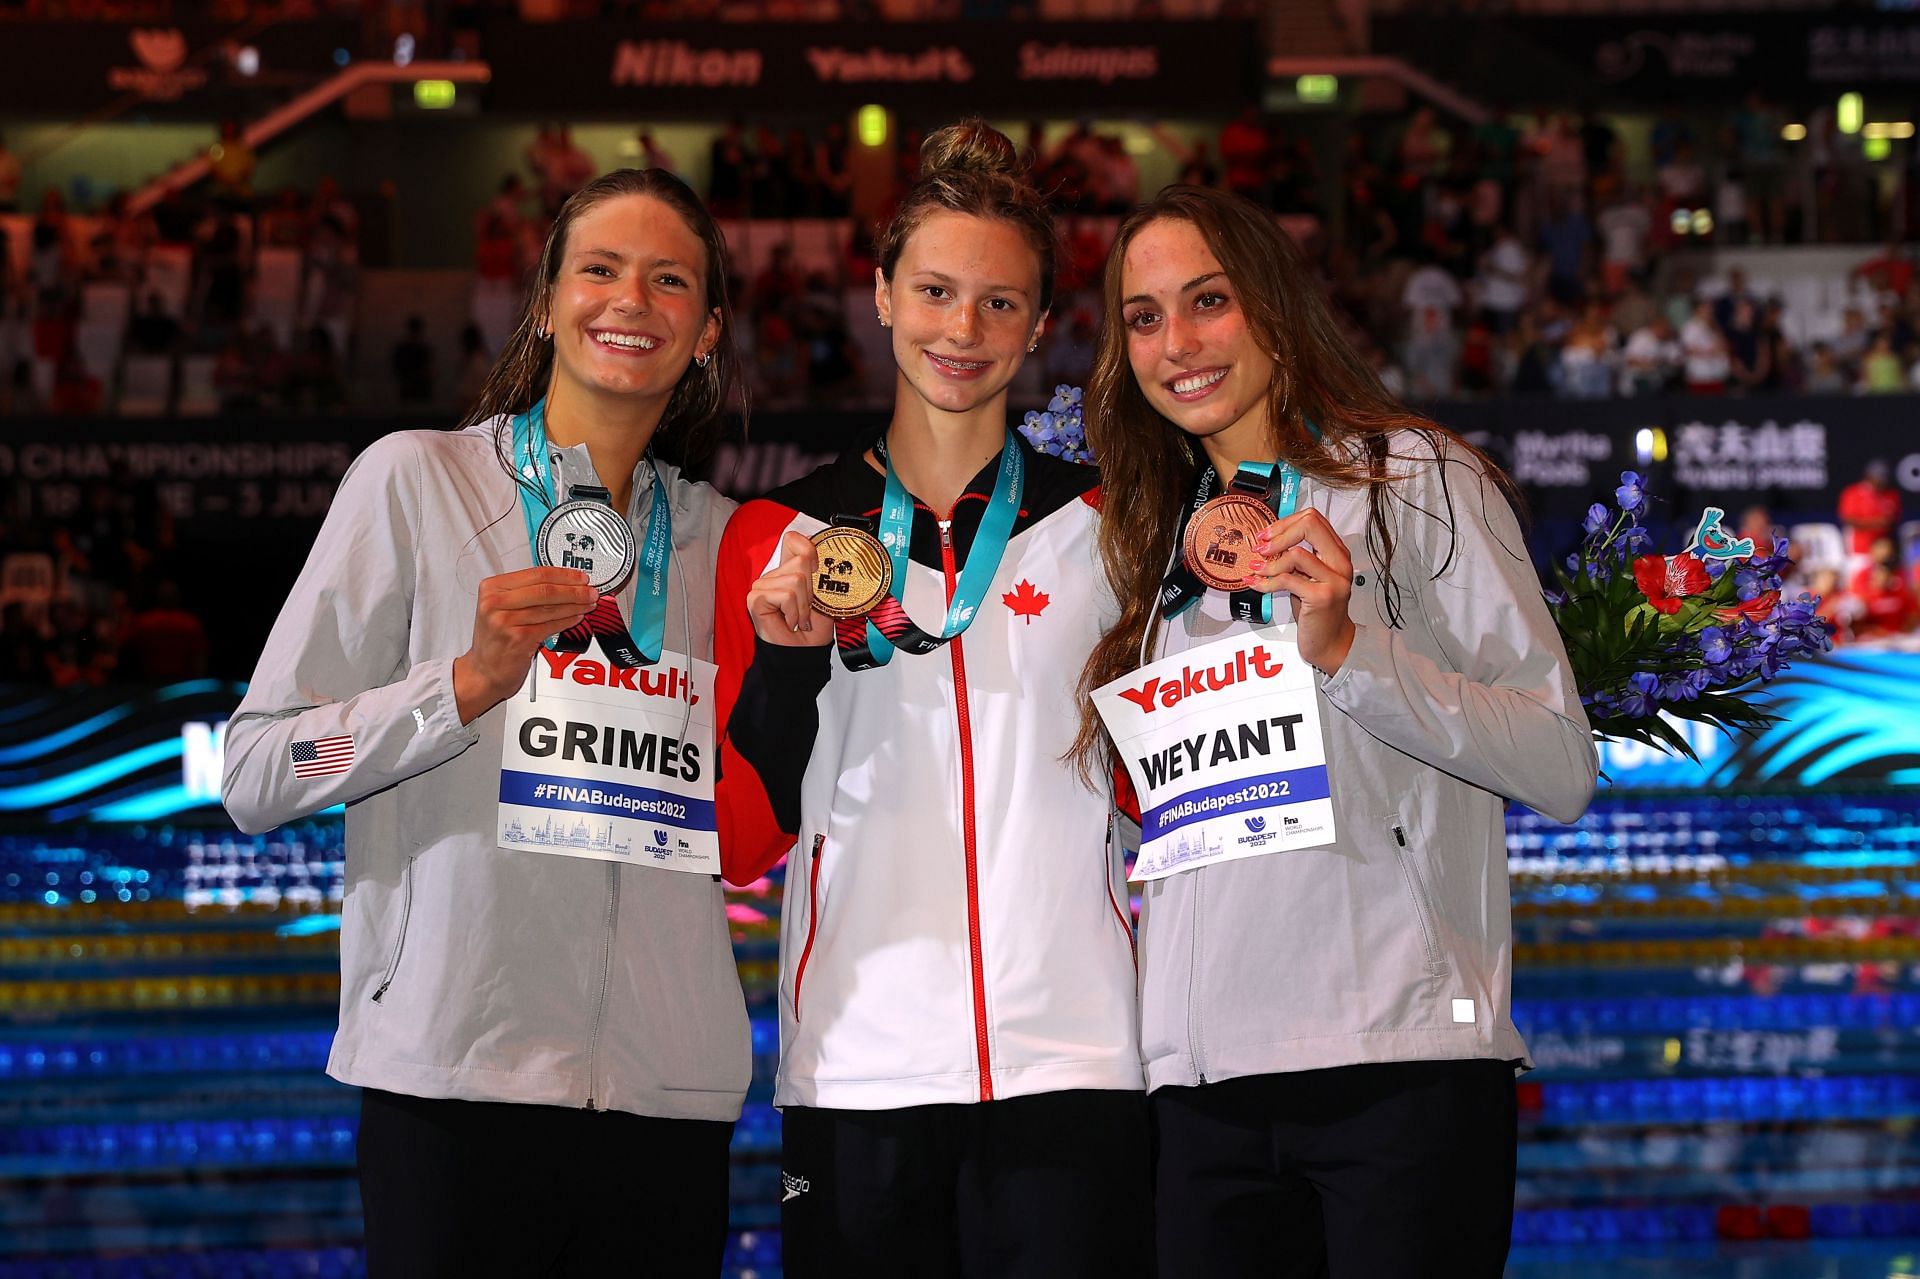 (L-R) Silver medalist, Katie Grimes, Summer McIntosh, and Emma Weyant pose with their medals during the medal ceremony for the Women&#039;s 400m Individual Medley Fon at the Budapest 2022 FINA World Championships 